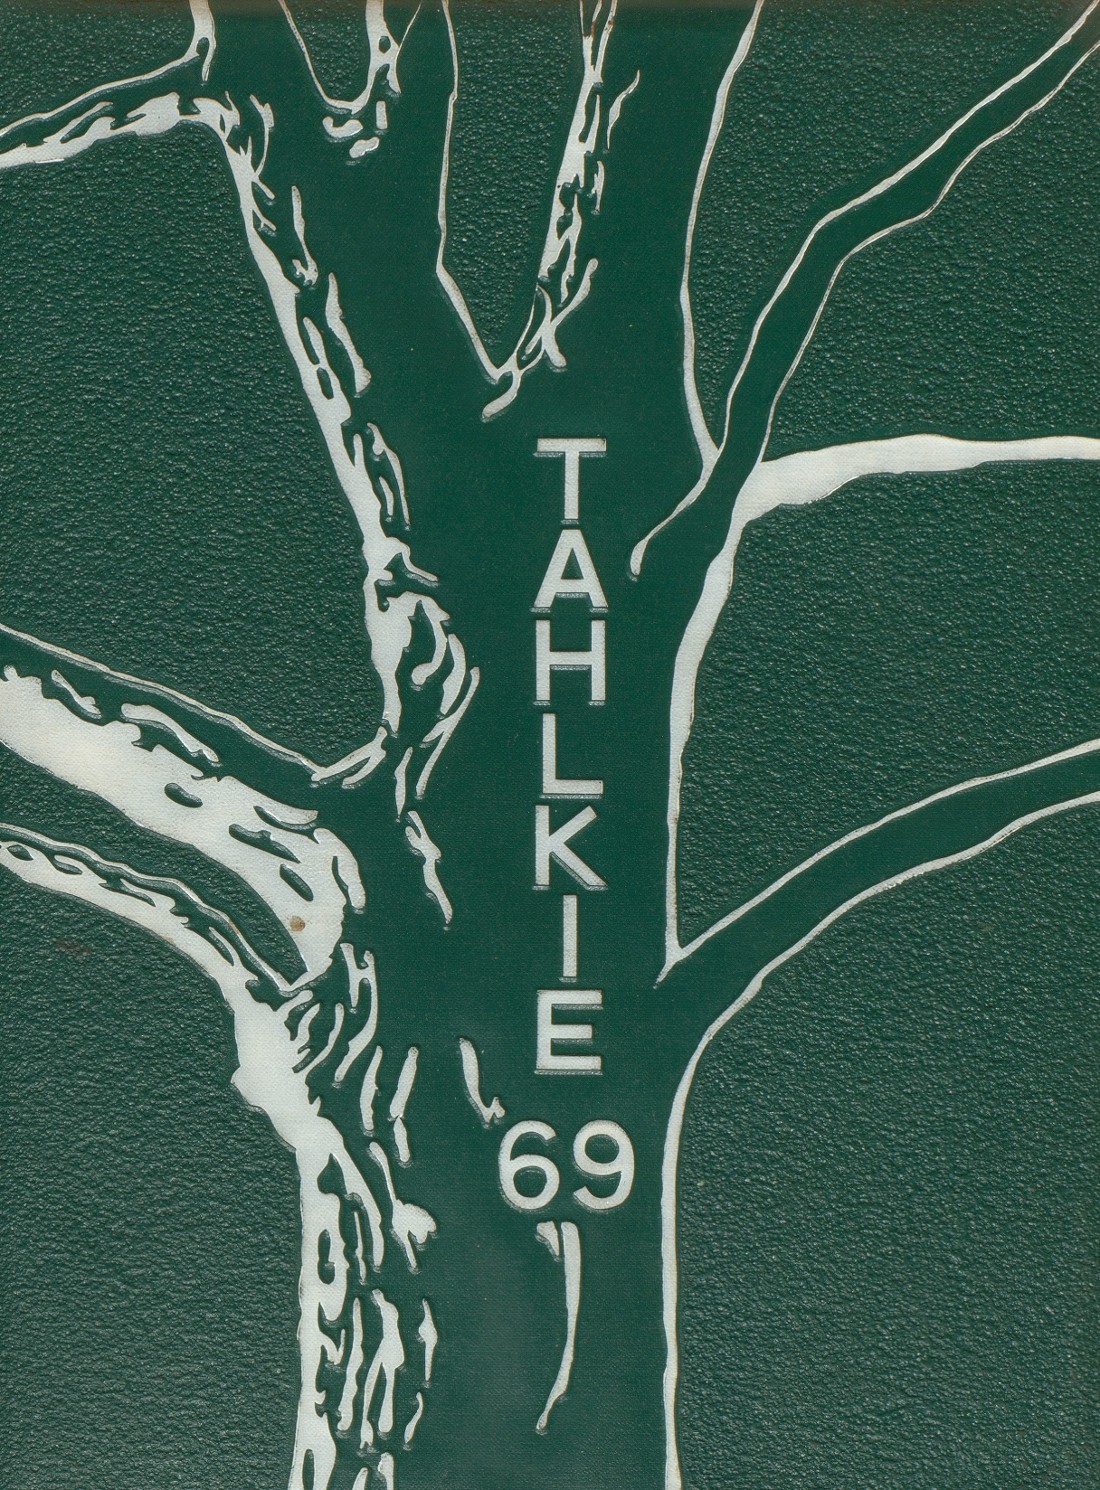 1969 yearbook from Tyee High School from Seattle, Washington for sale